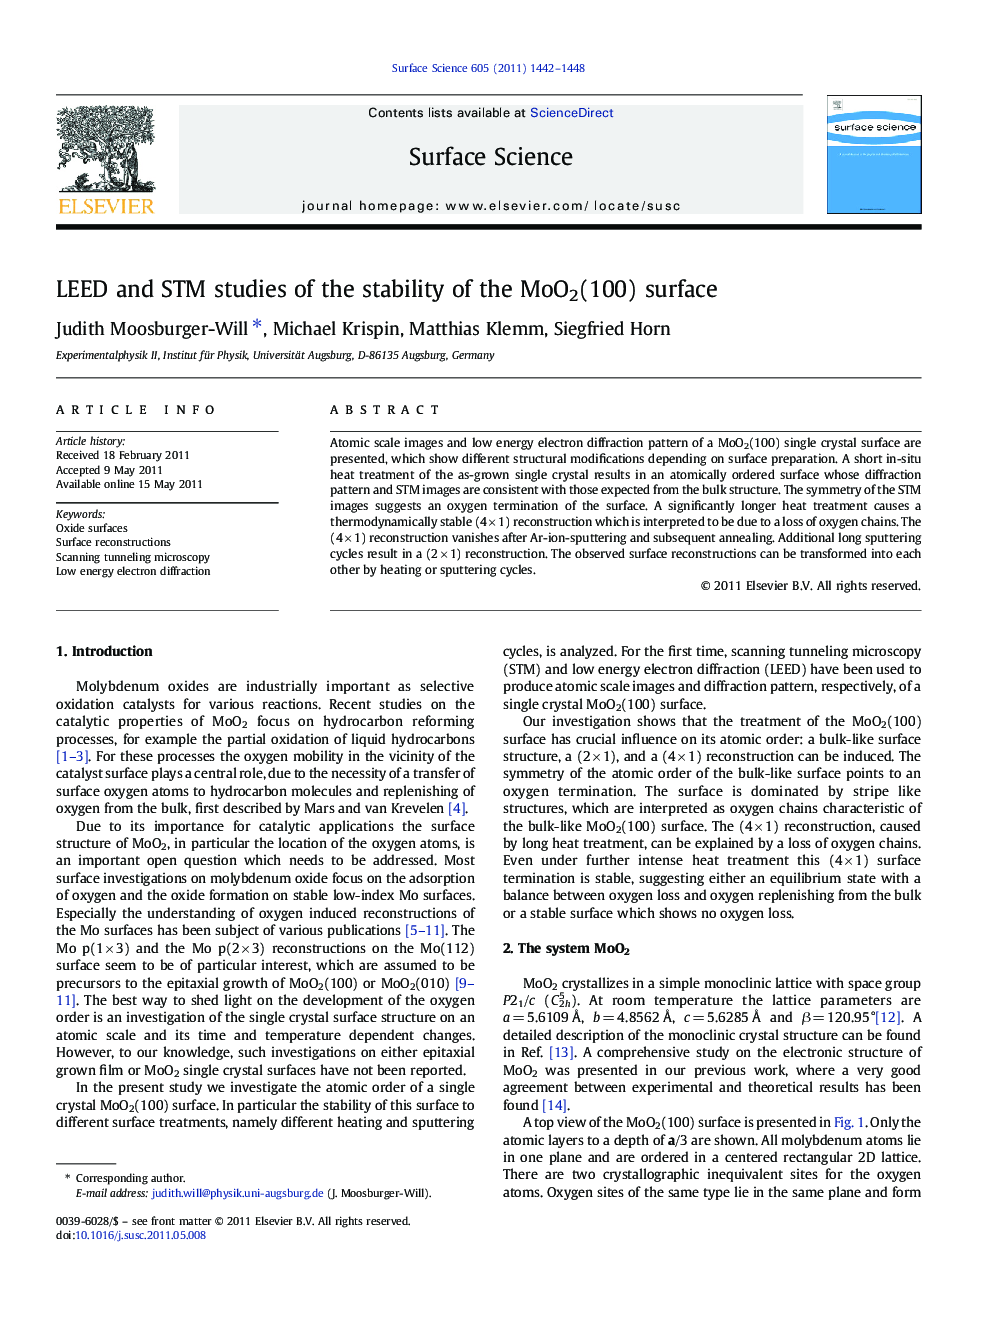 LEED and STM studies of the stability of the MoO2(100) surface